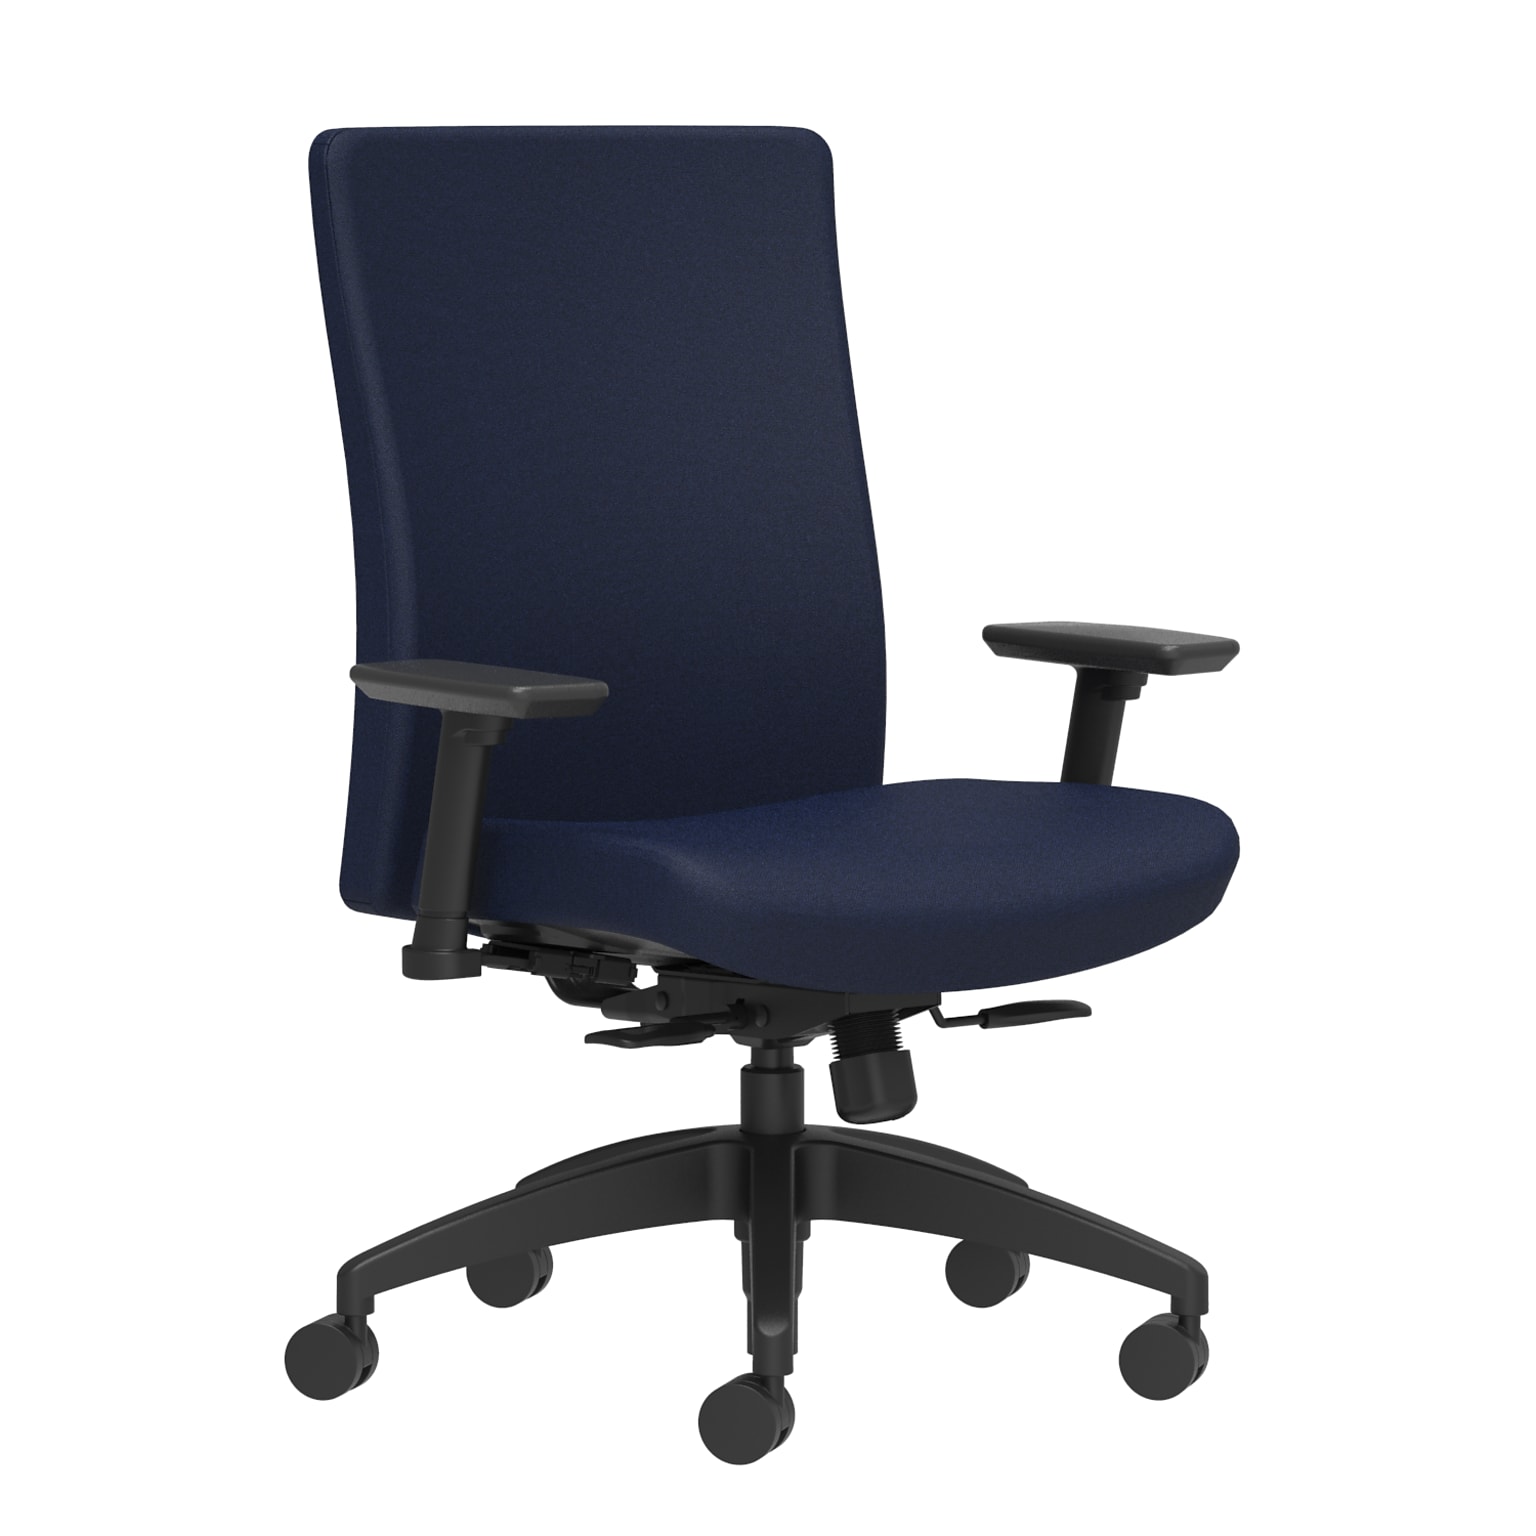 Union & Scale Workplace2.0™ Task Chair Upholstered 2D, Adjustable Arms, Navy Fabric, Synchro Tilt (54146)